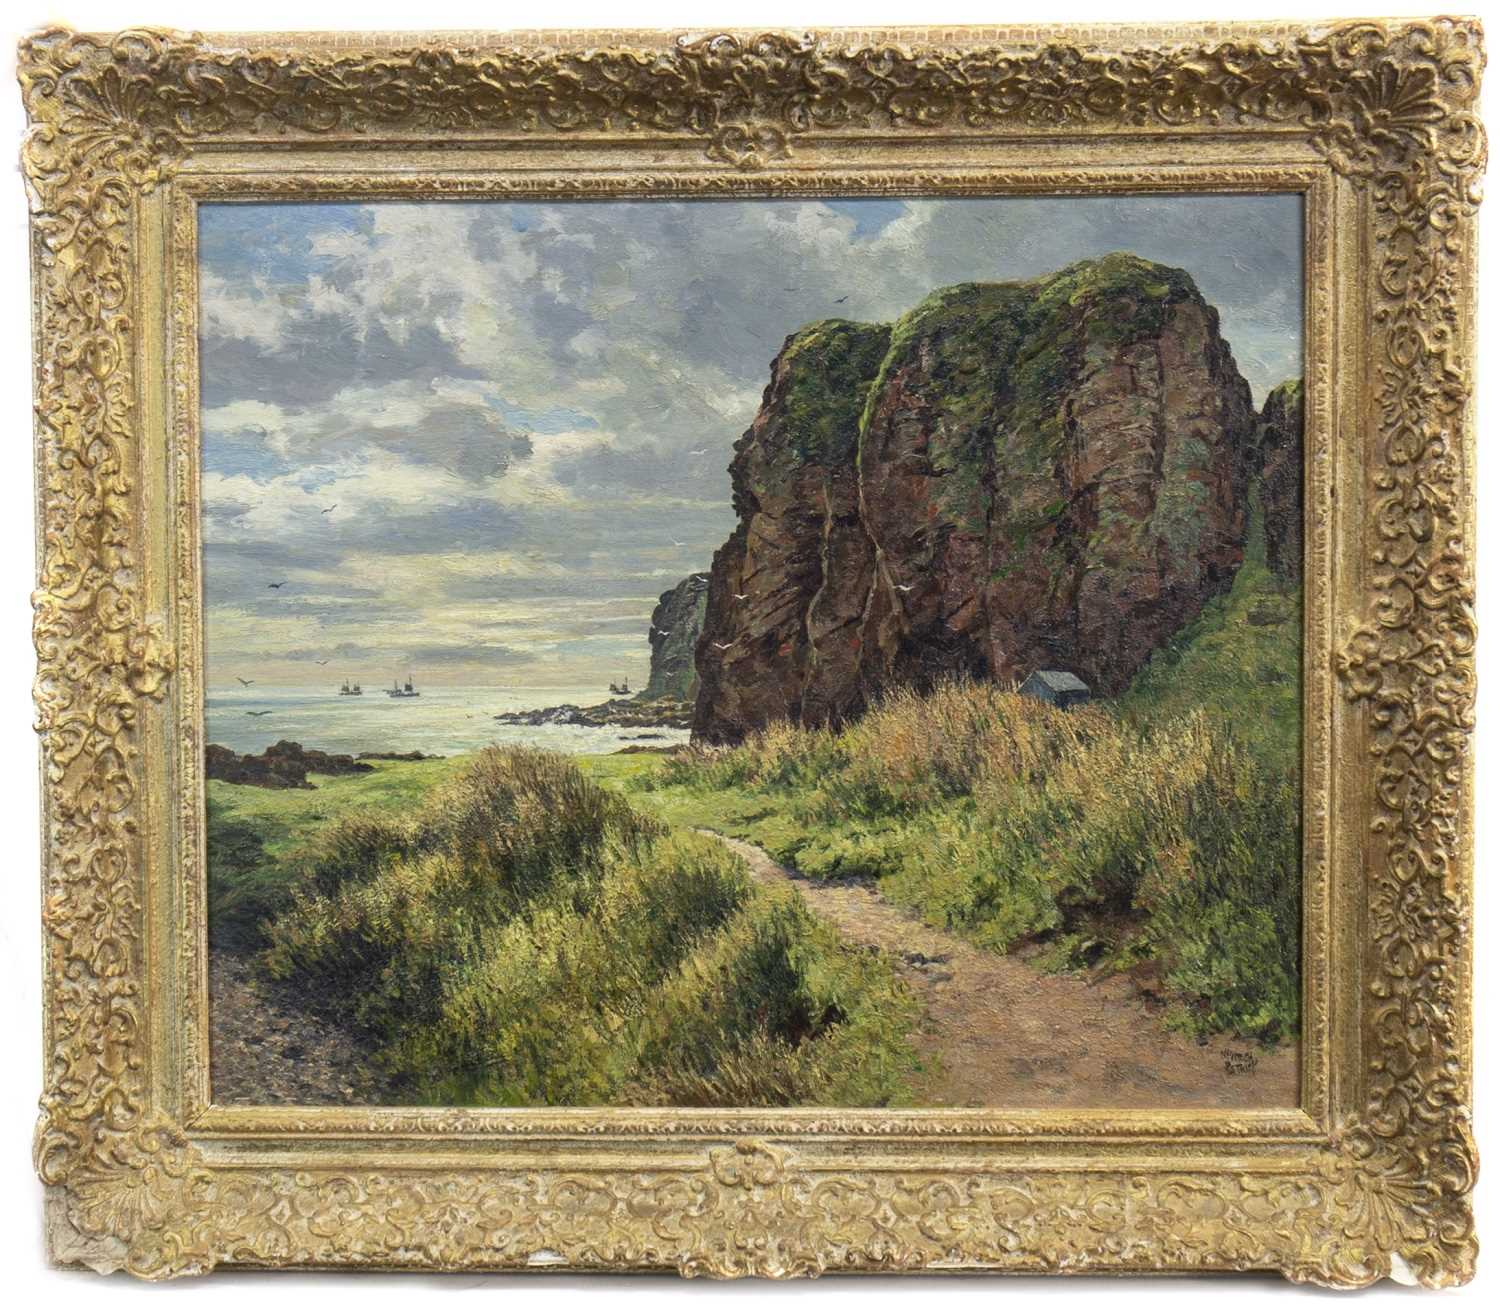 Lot 426 - THE PATH TO THE HARBOUR, AUCHMITHIE, AN OIL BY JAMES MCINTOSH PATRICK